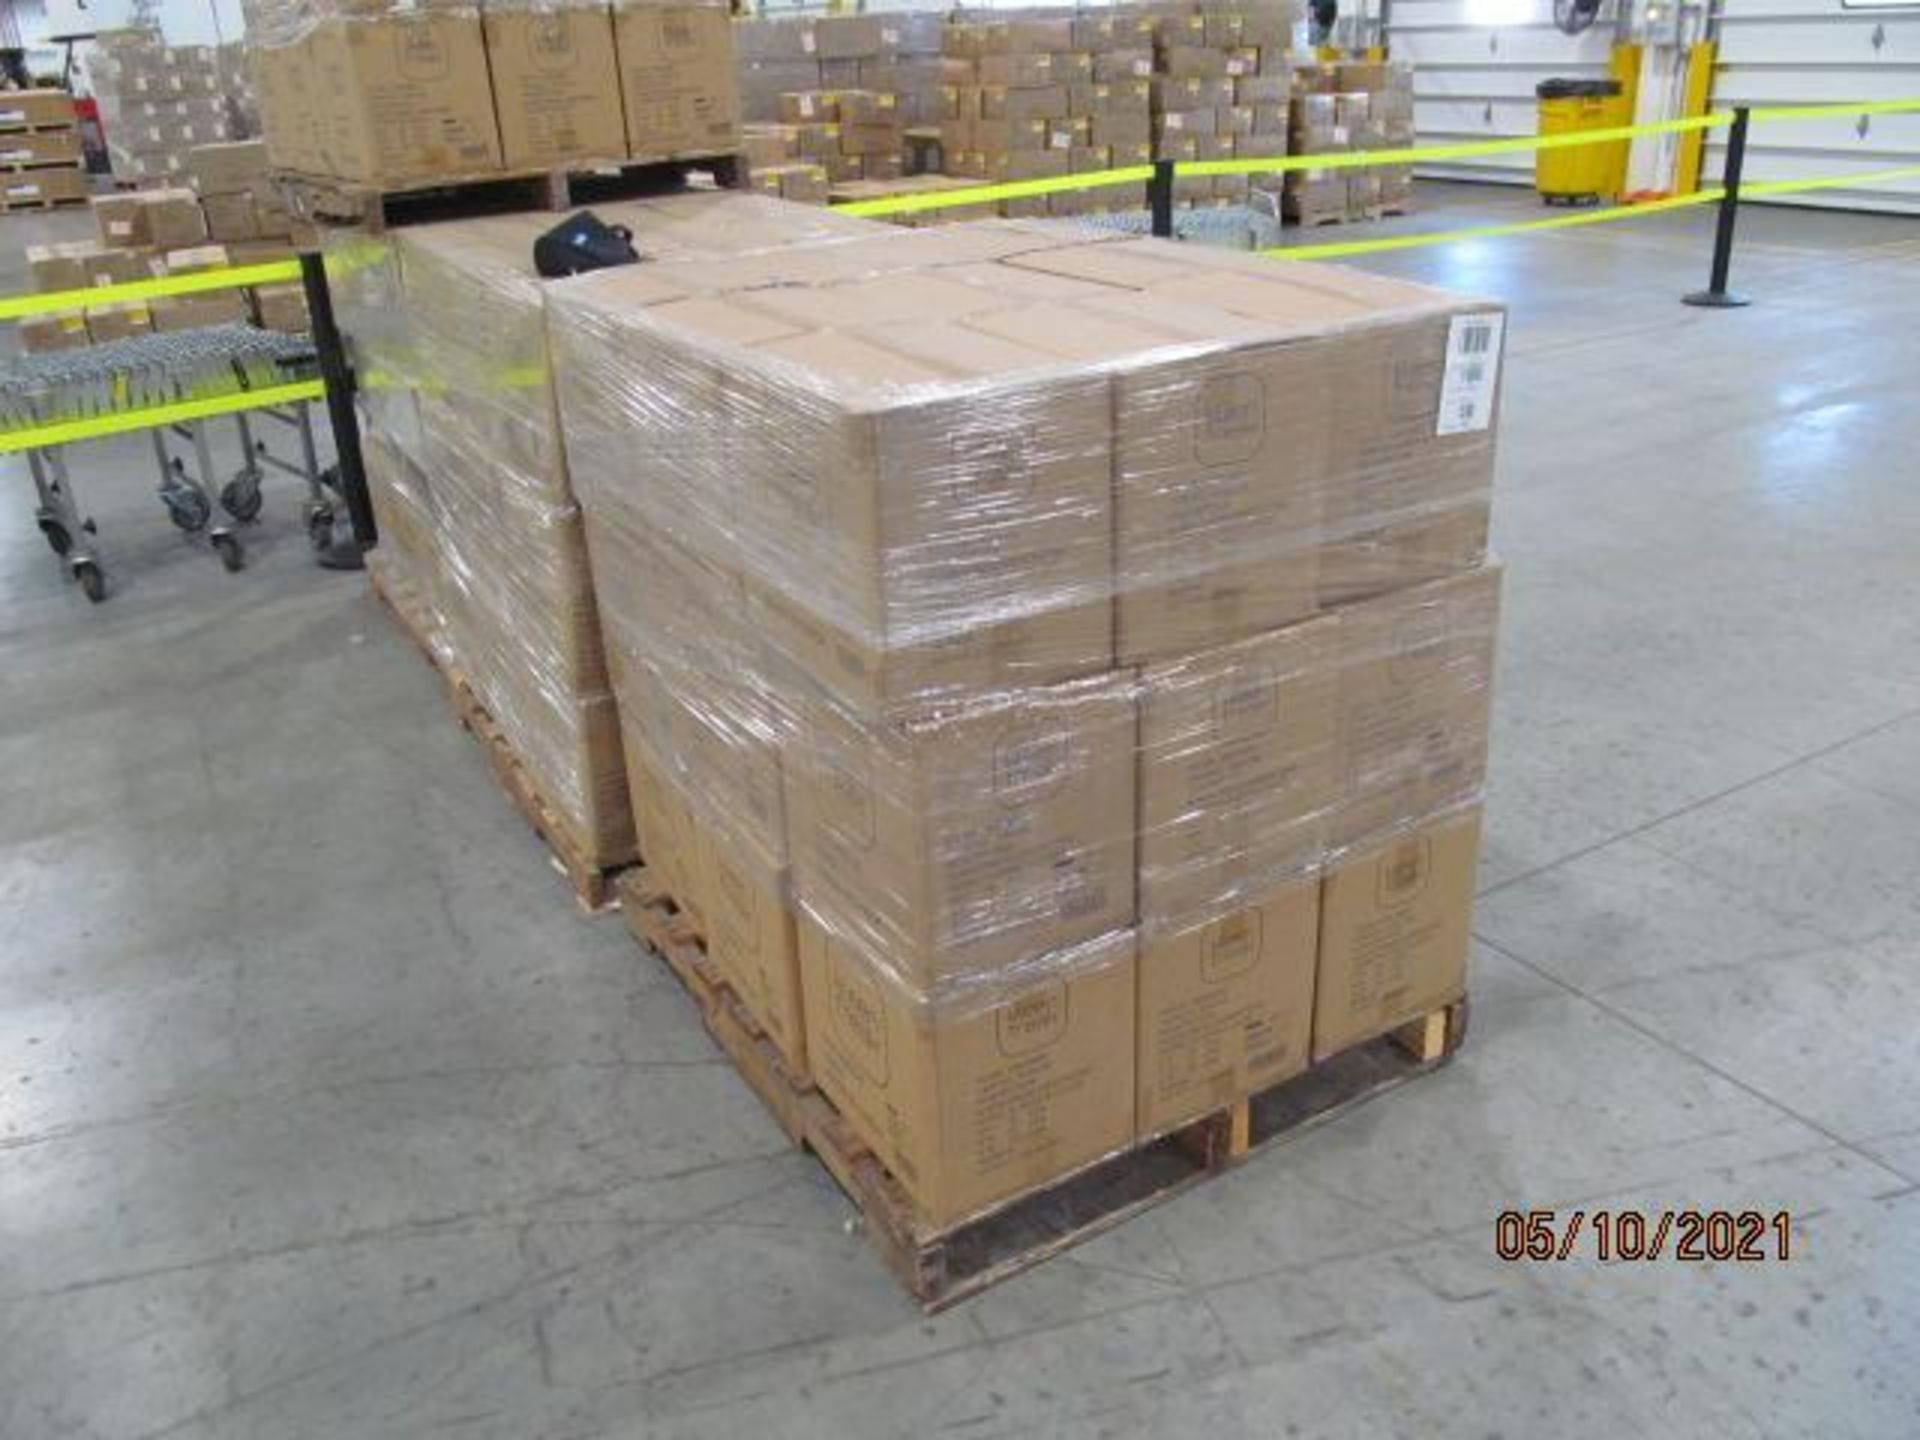 Lot of Waxman Kleen Freak Sanitizing Wipes consisting of 202,176 packages on 312 pallets. Each packa - Image 7 of 11